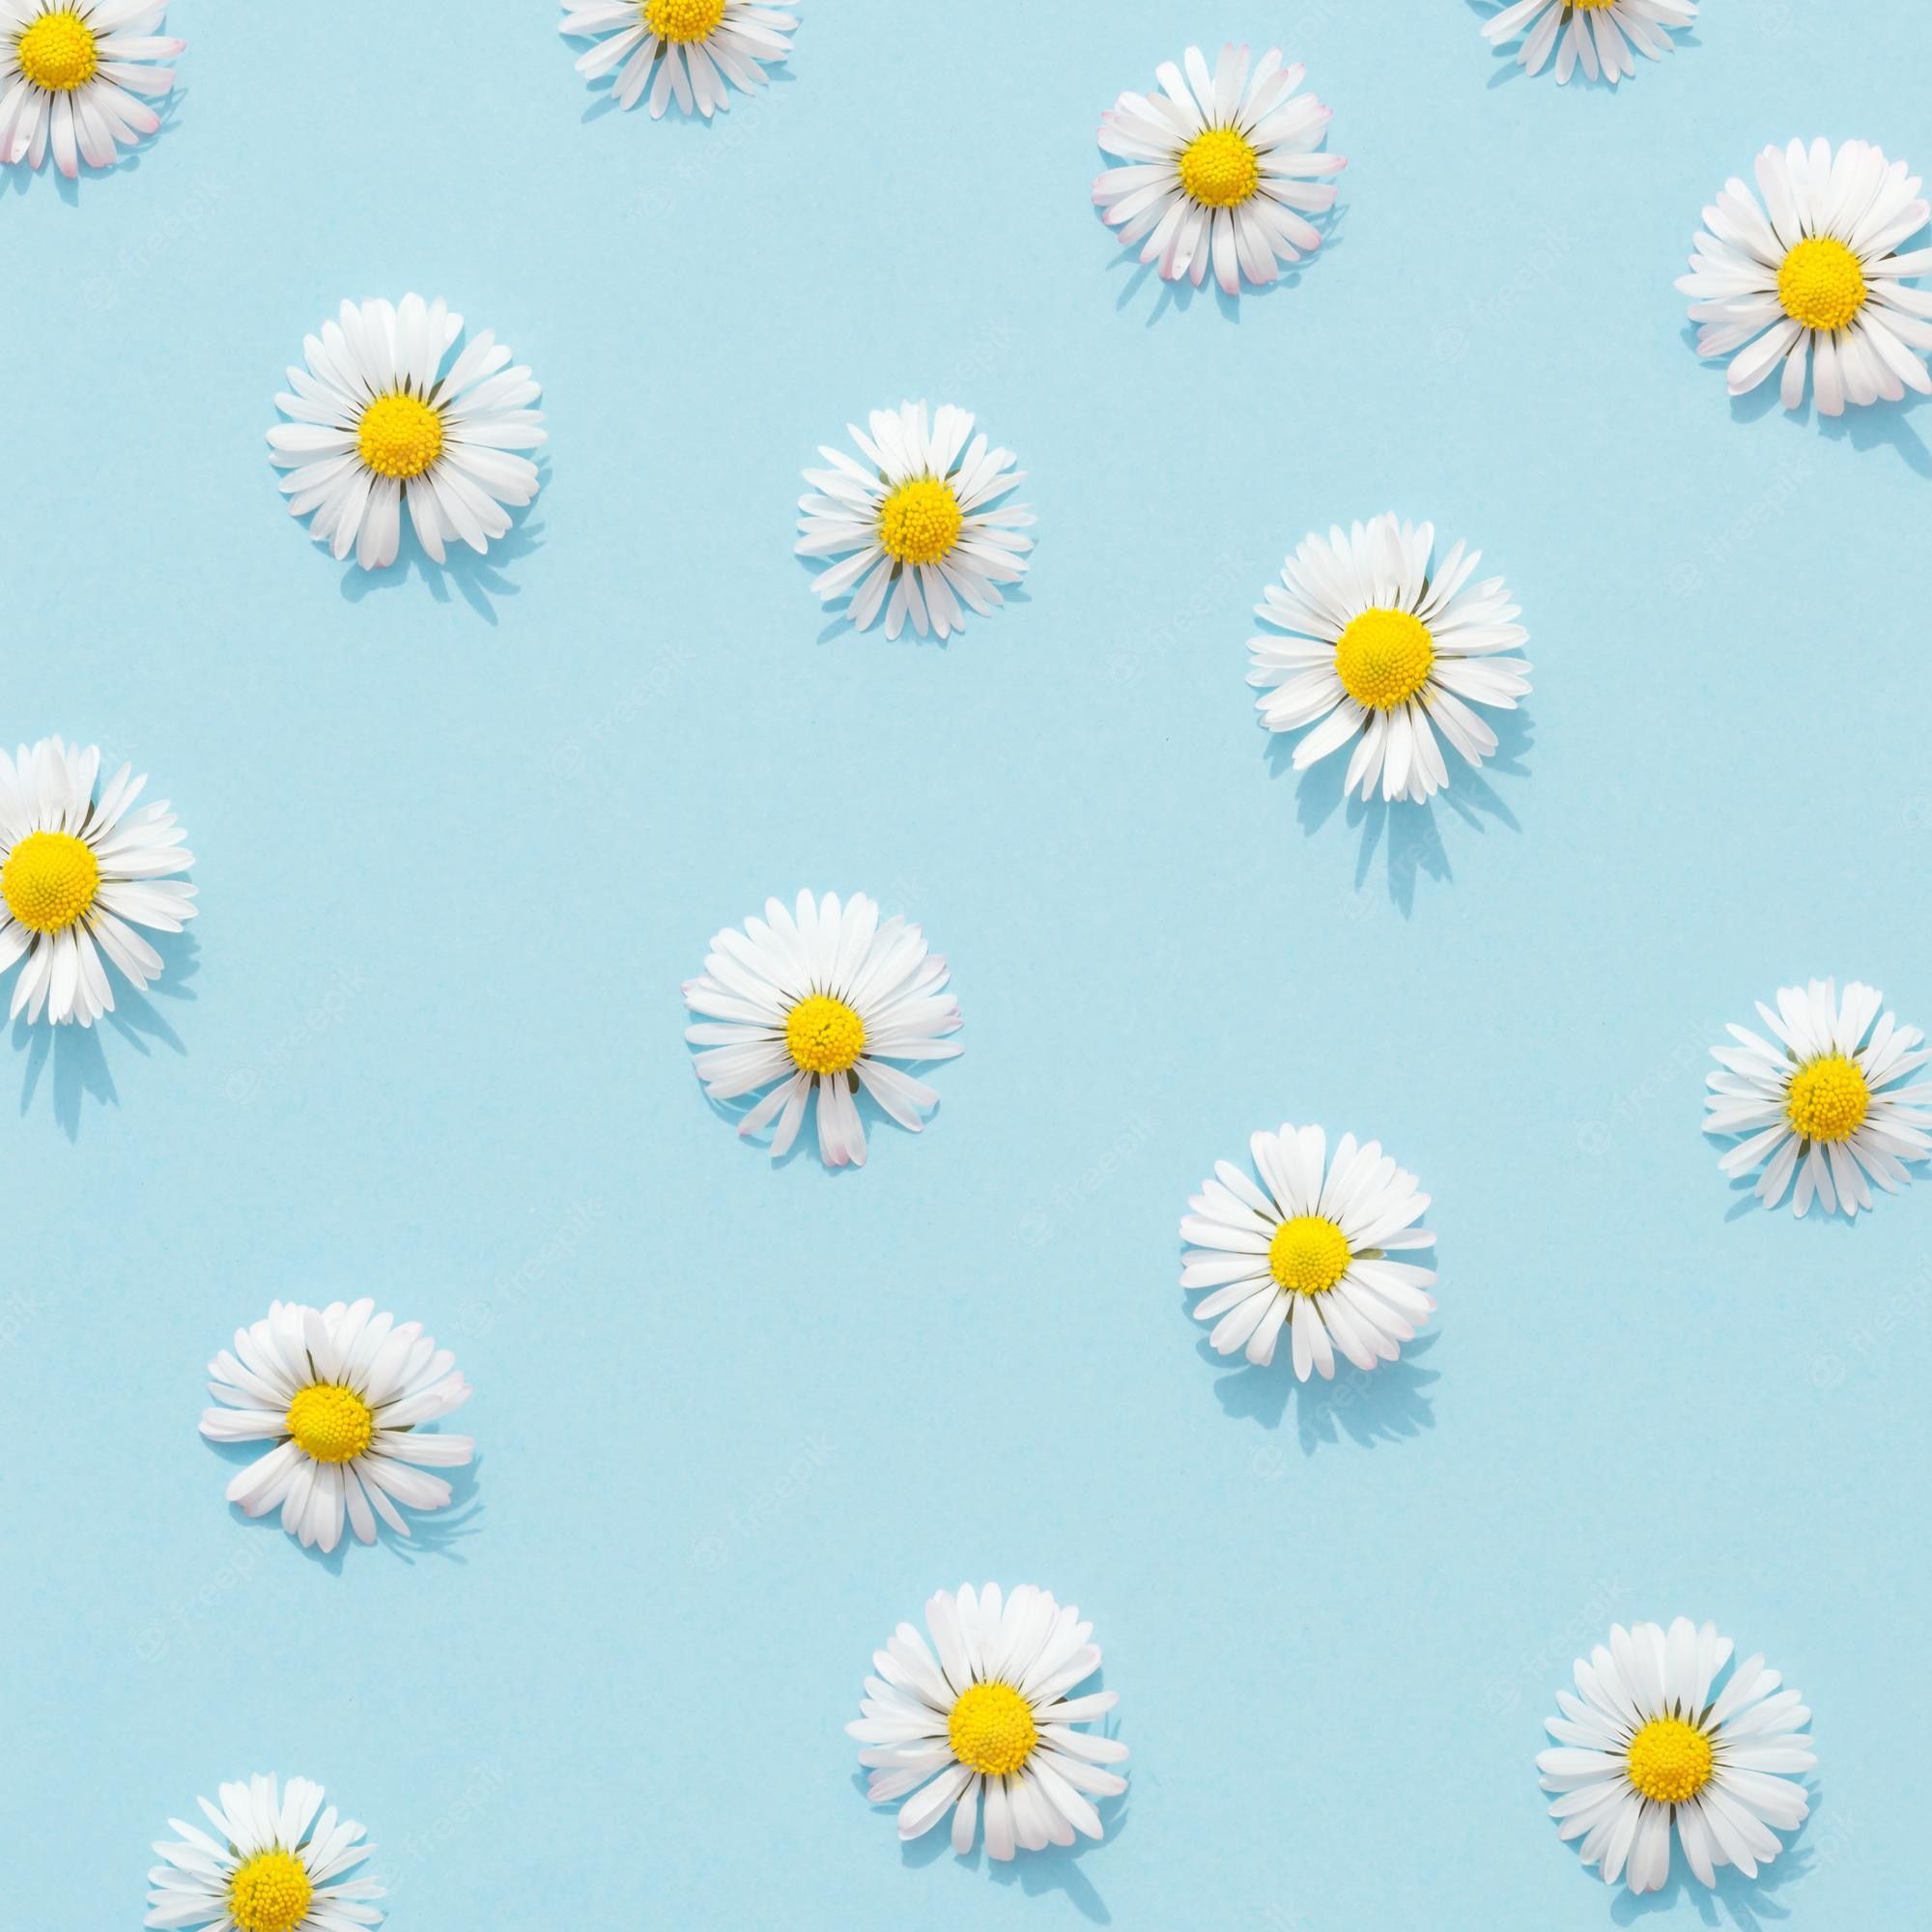 A blue background with white daisies on it - Pastel blue, pastel